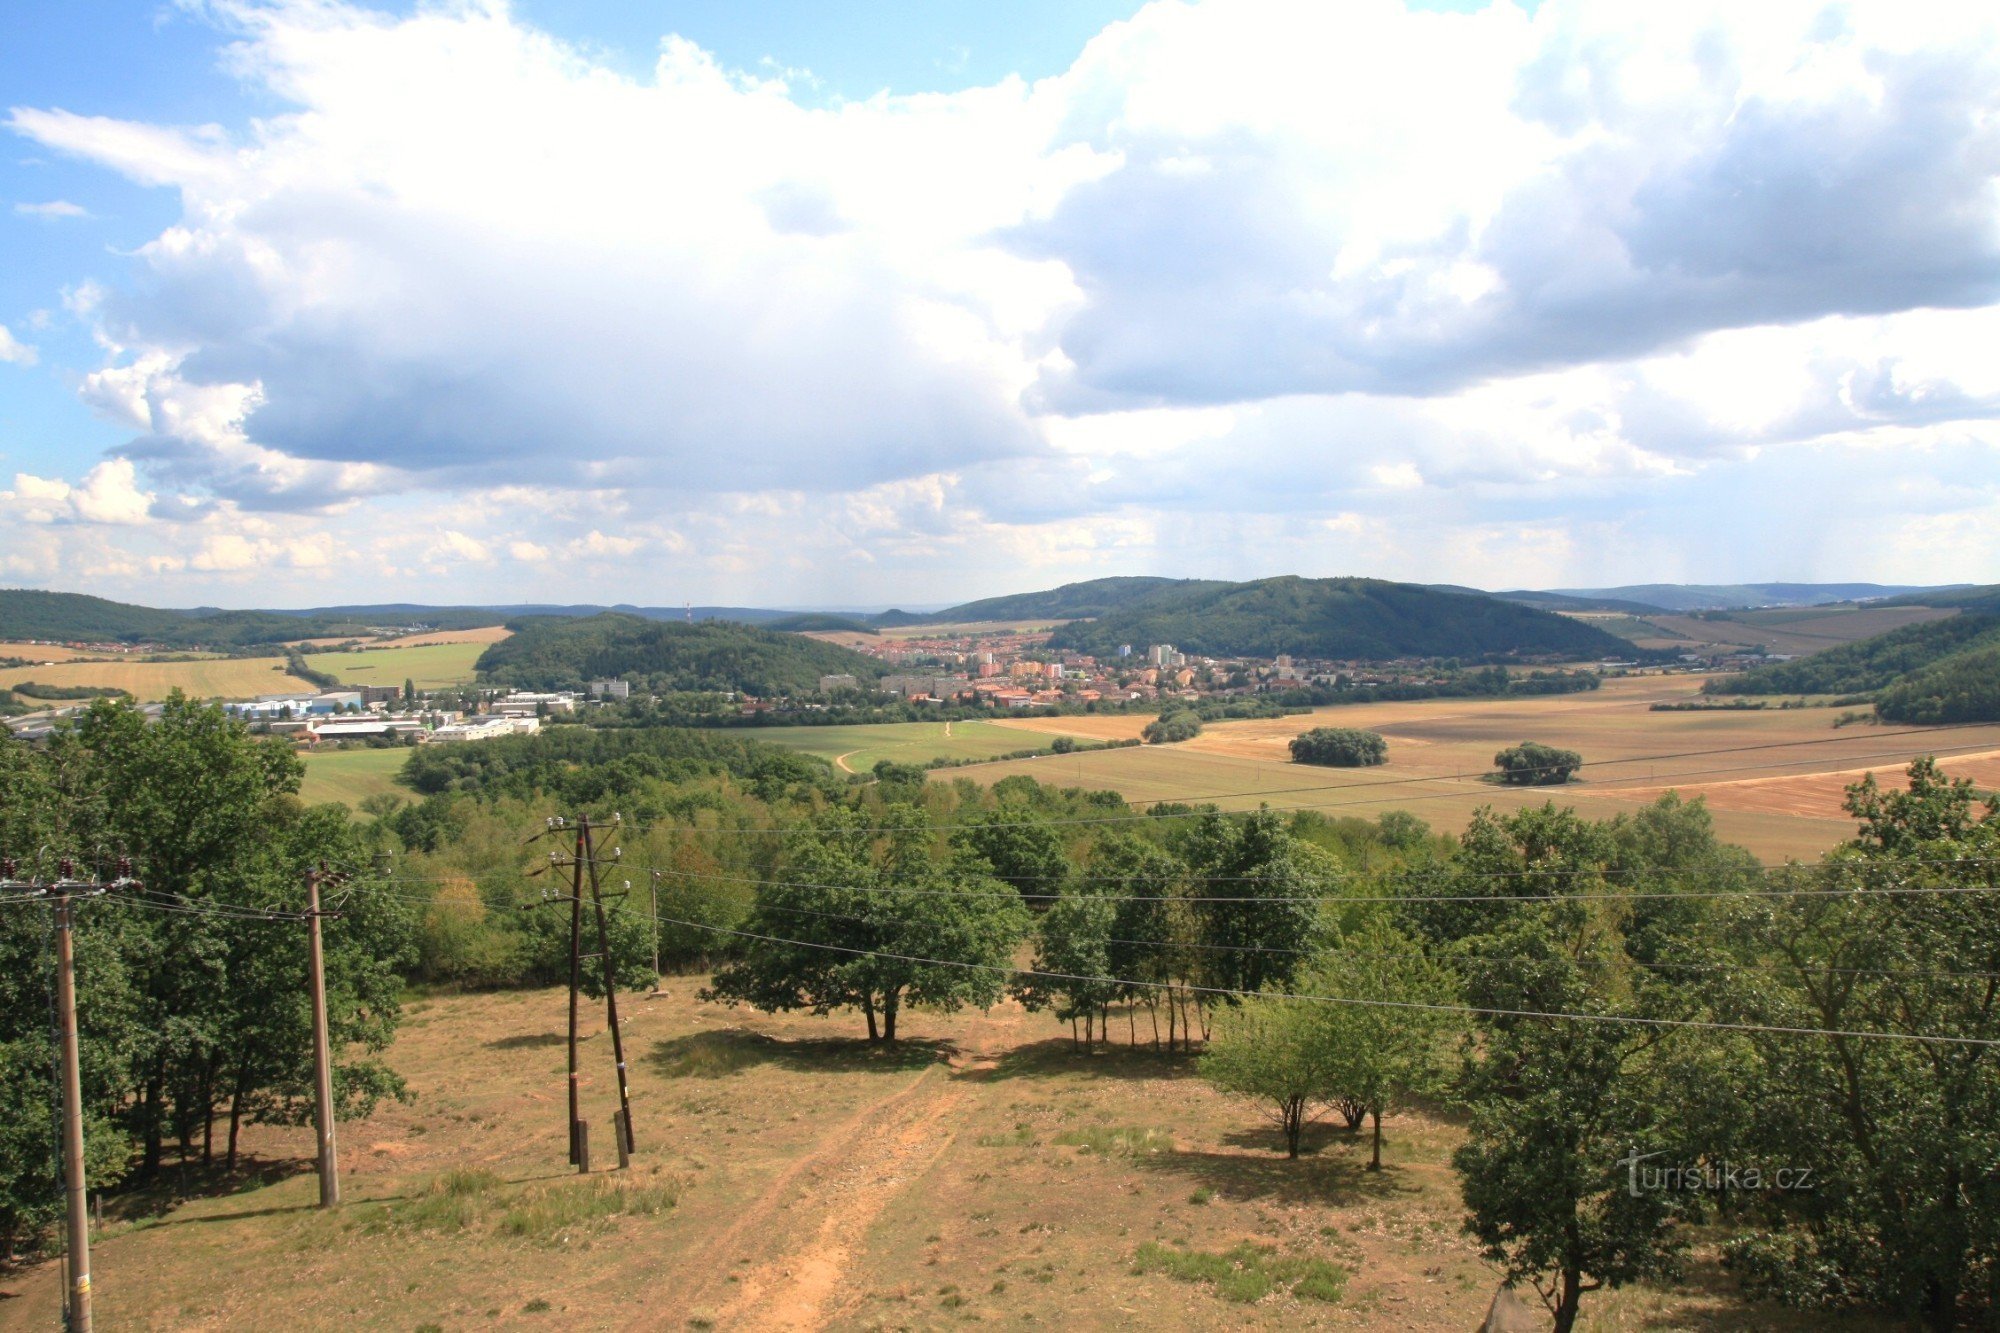 View from the observation tower towards Kuřimi